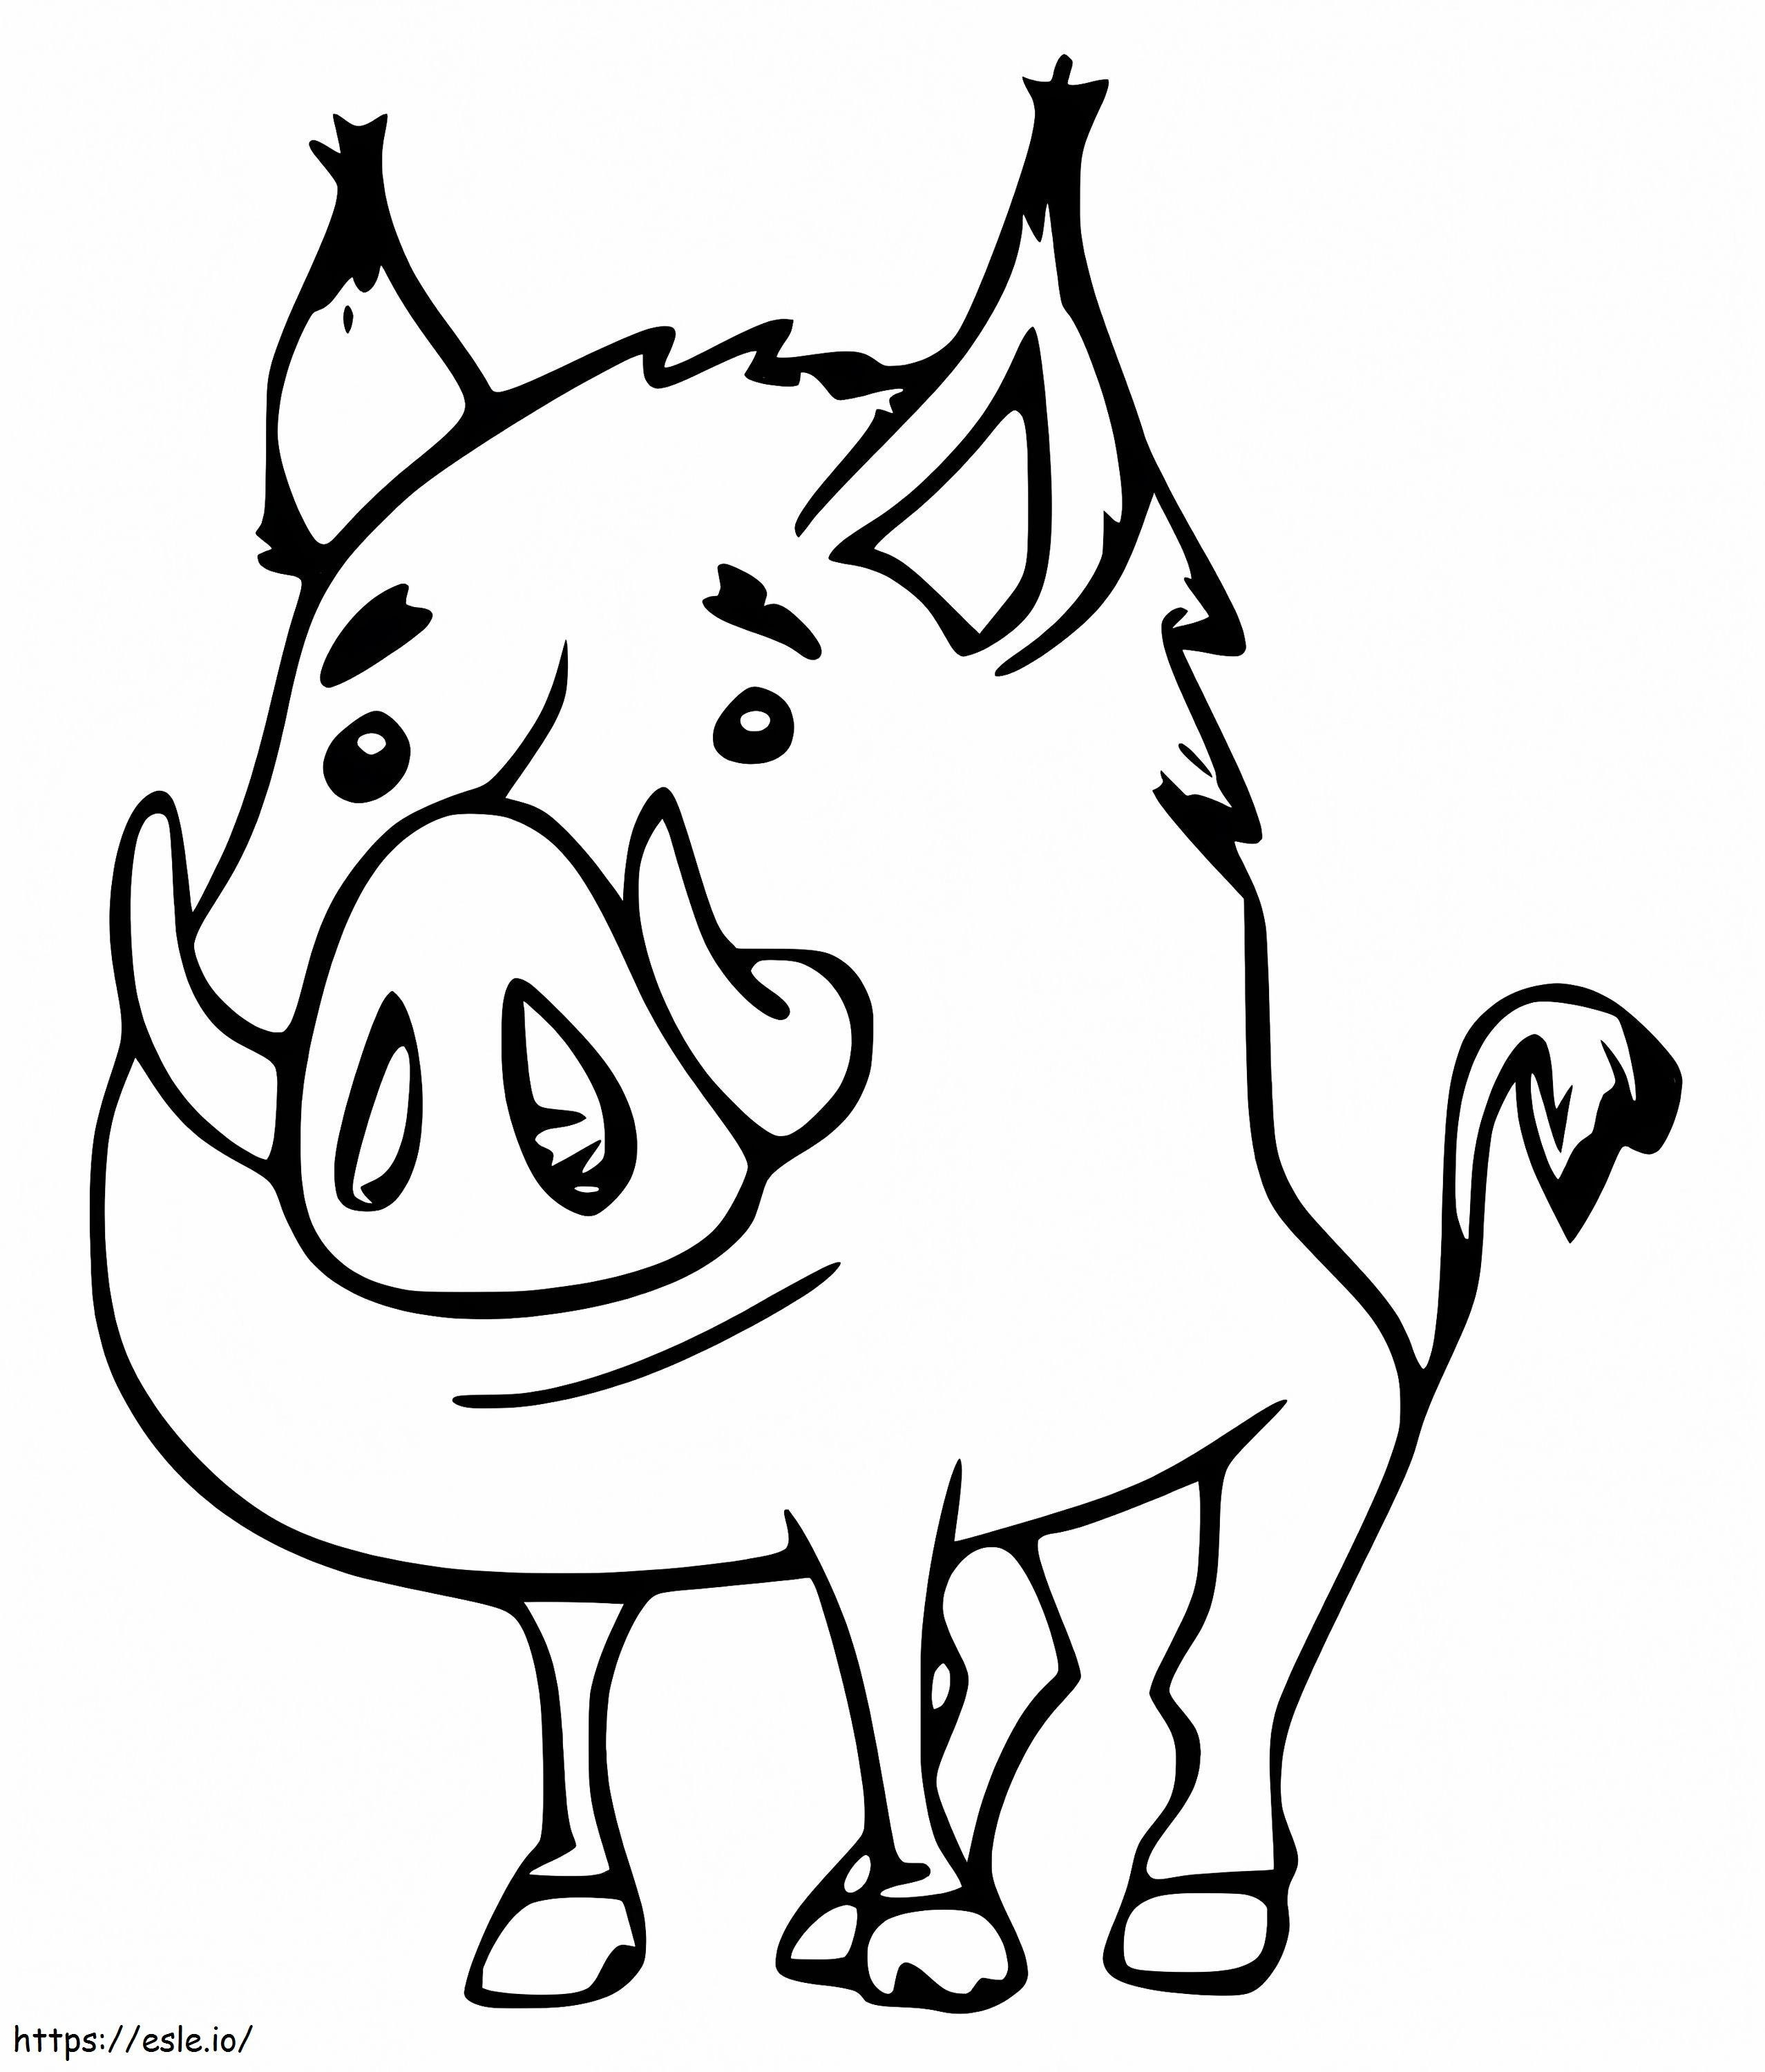 Boar Smiling coloring page